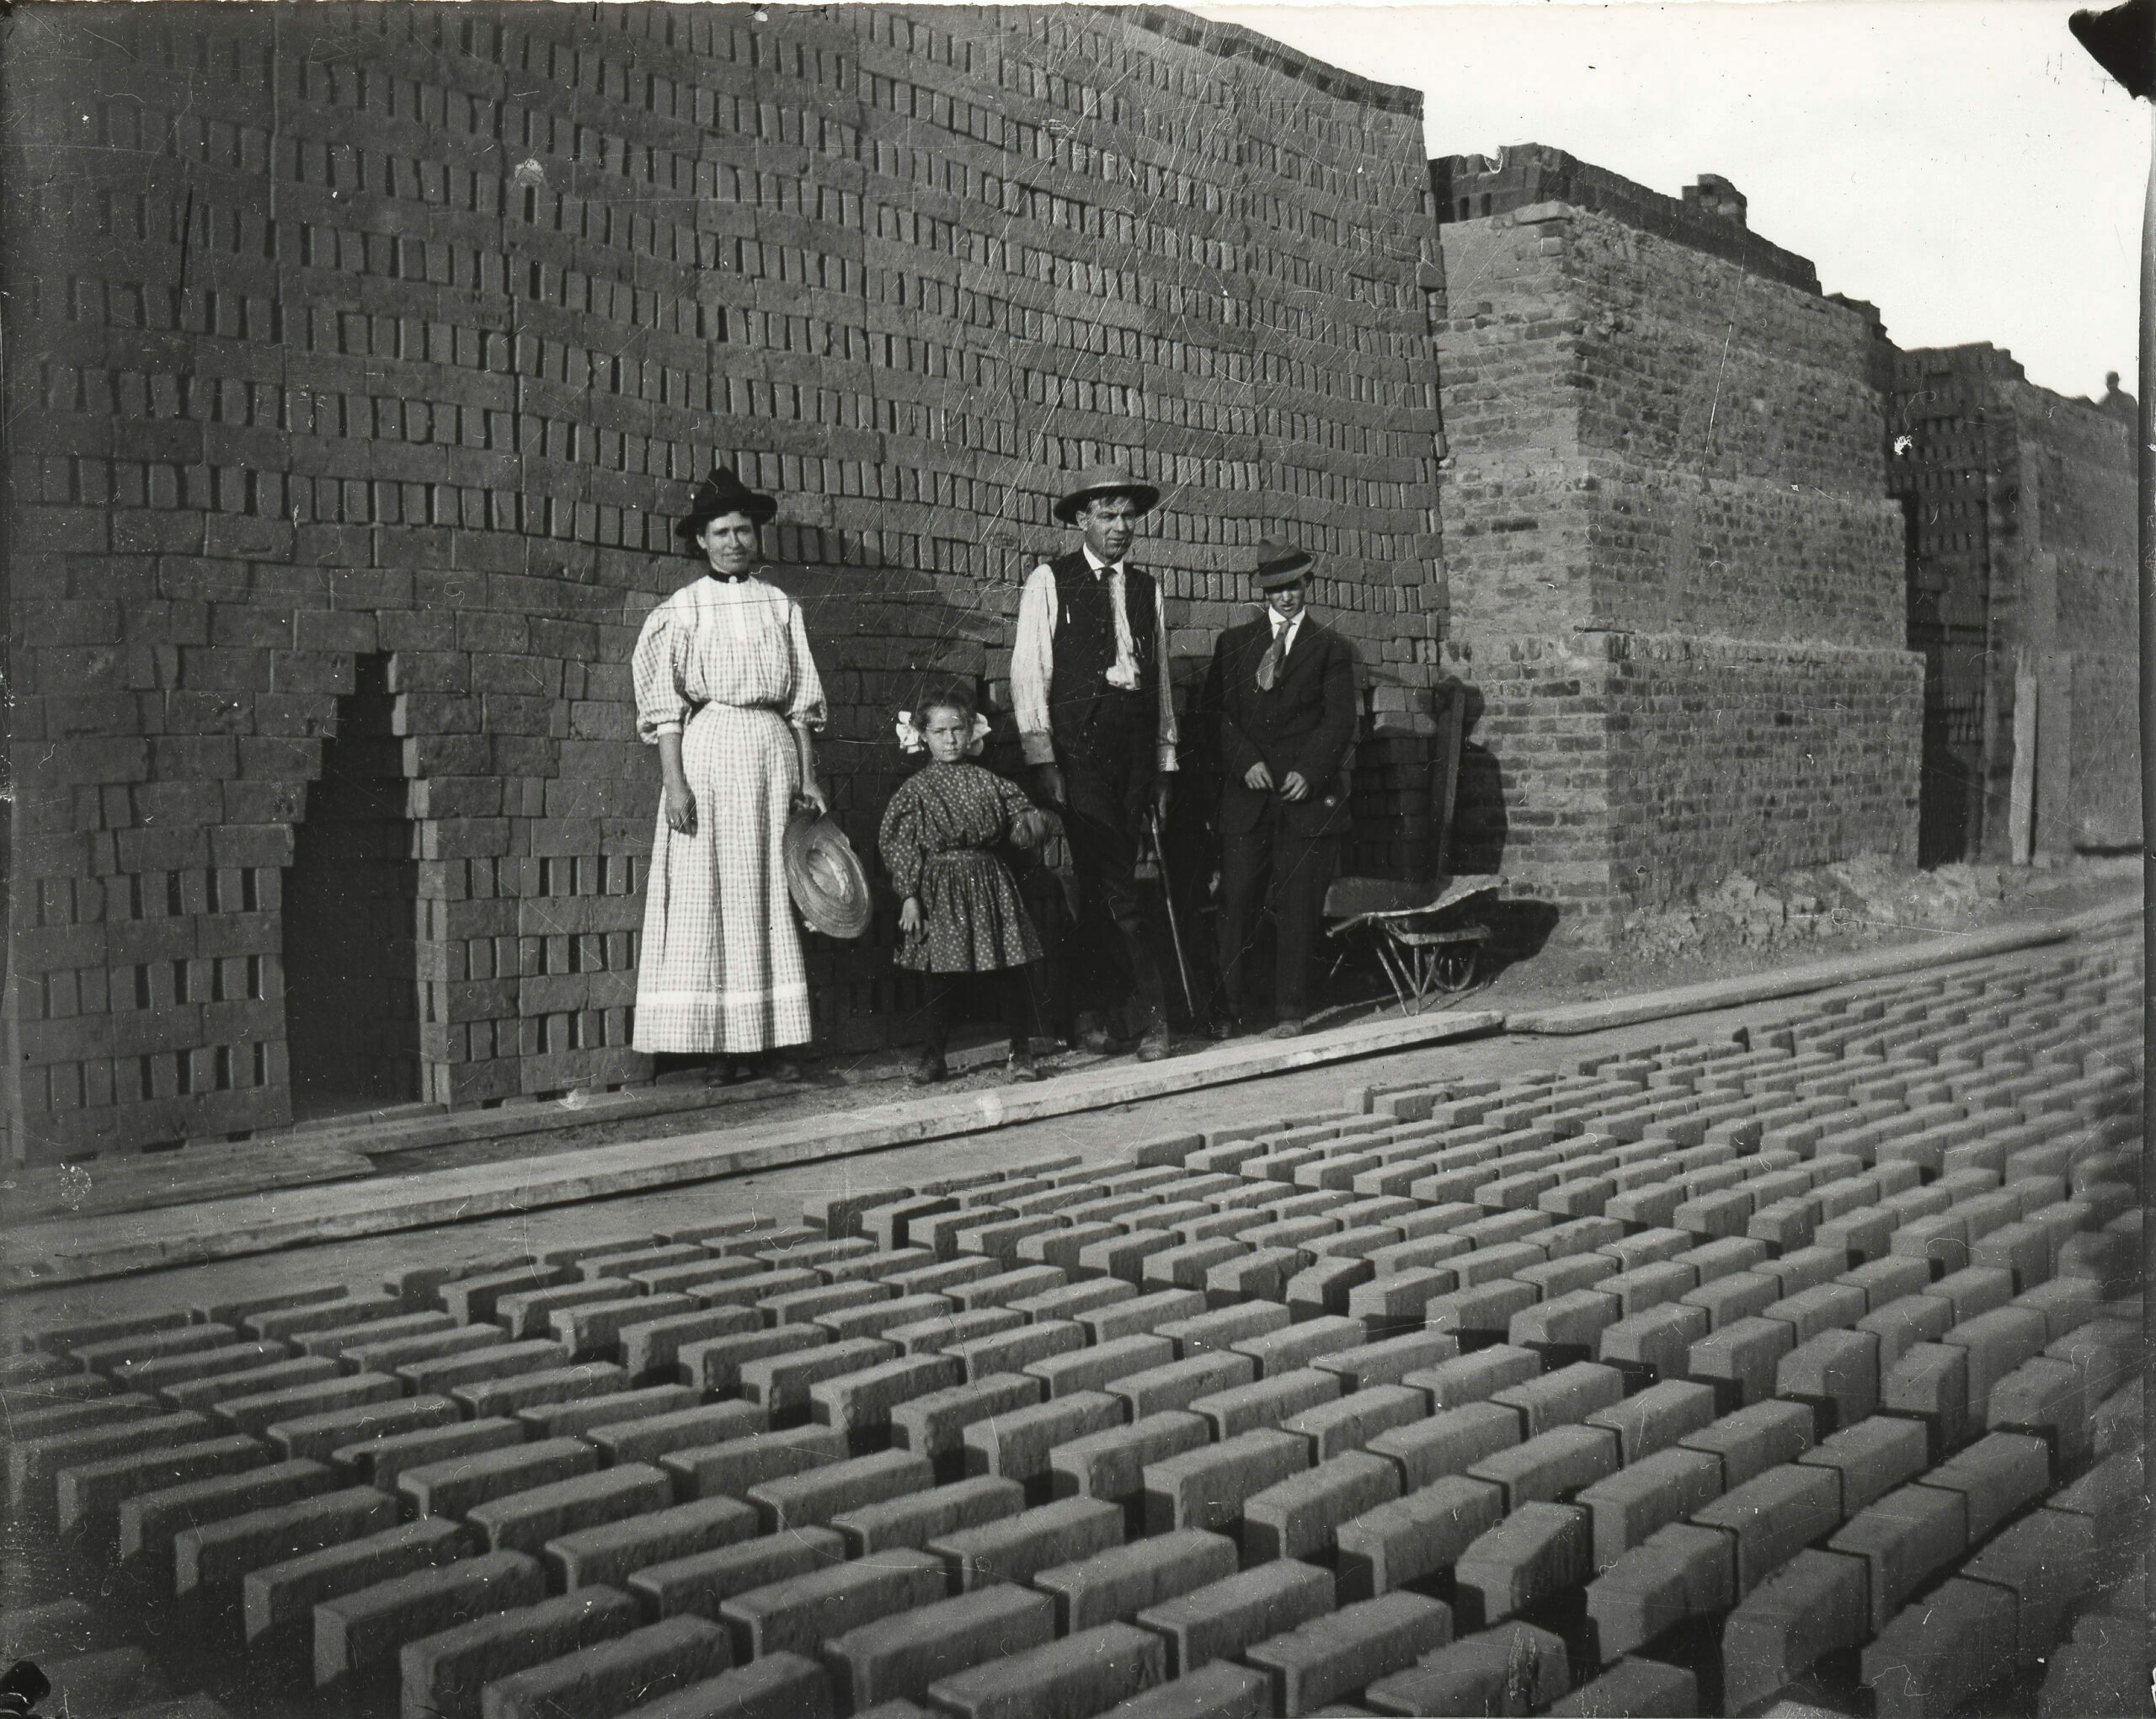 Brick making was often a family business that included children, parents, and maybe a hired hand or two. Sun-dried bricks were stacked, 20,000-50,000 at a time, creating their own kiln. Plastered with mud to limit air, a fire was kindled and carefully monitored to harden bricks.  (1)